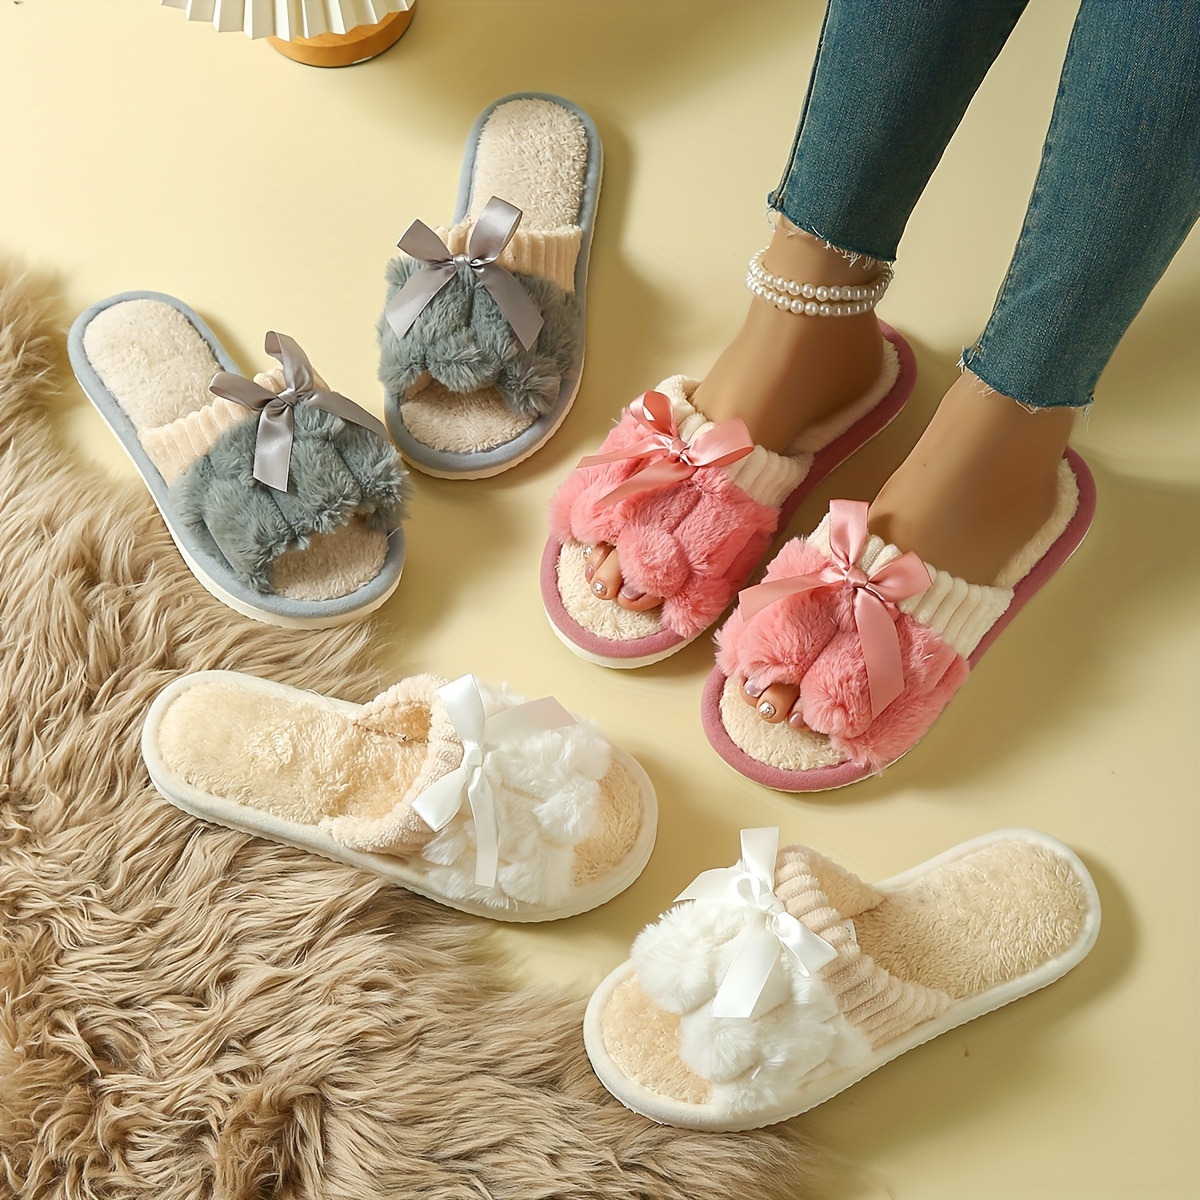 

Bowknot Fluffy Home Slippers, Lightweight Soft Sole Plush Lined Bedroom Slippers, Non-slip Floor Slippers, Winter & Autumn